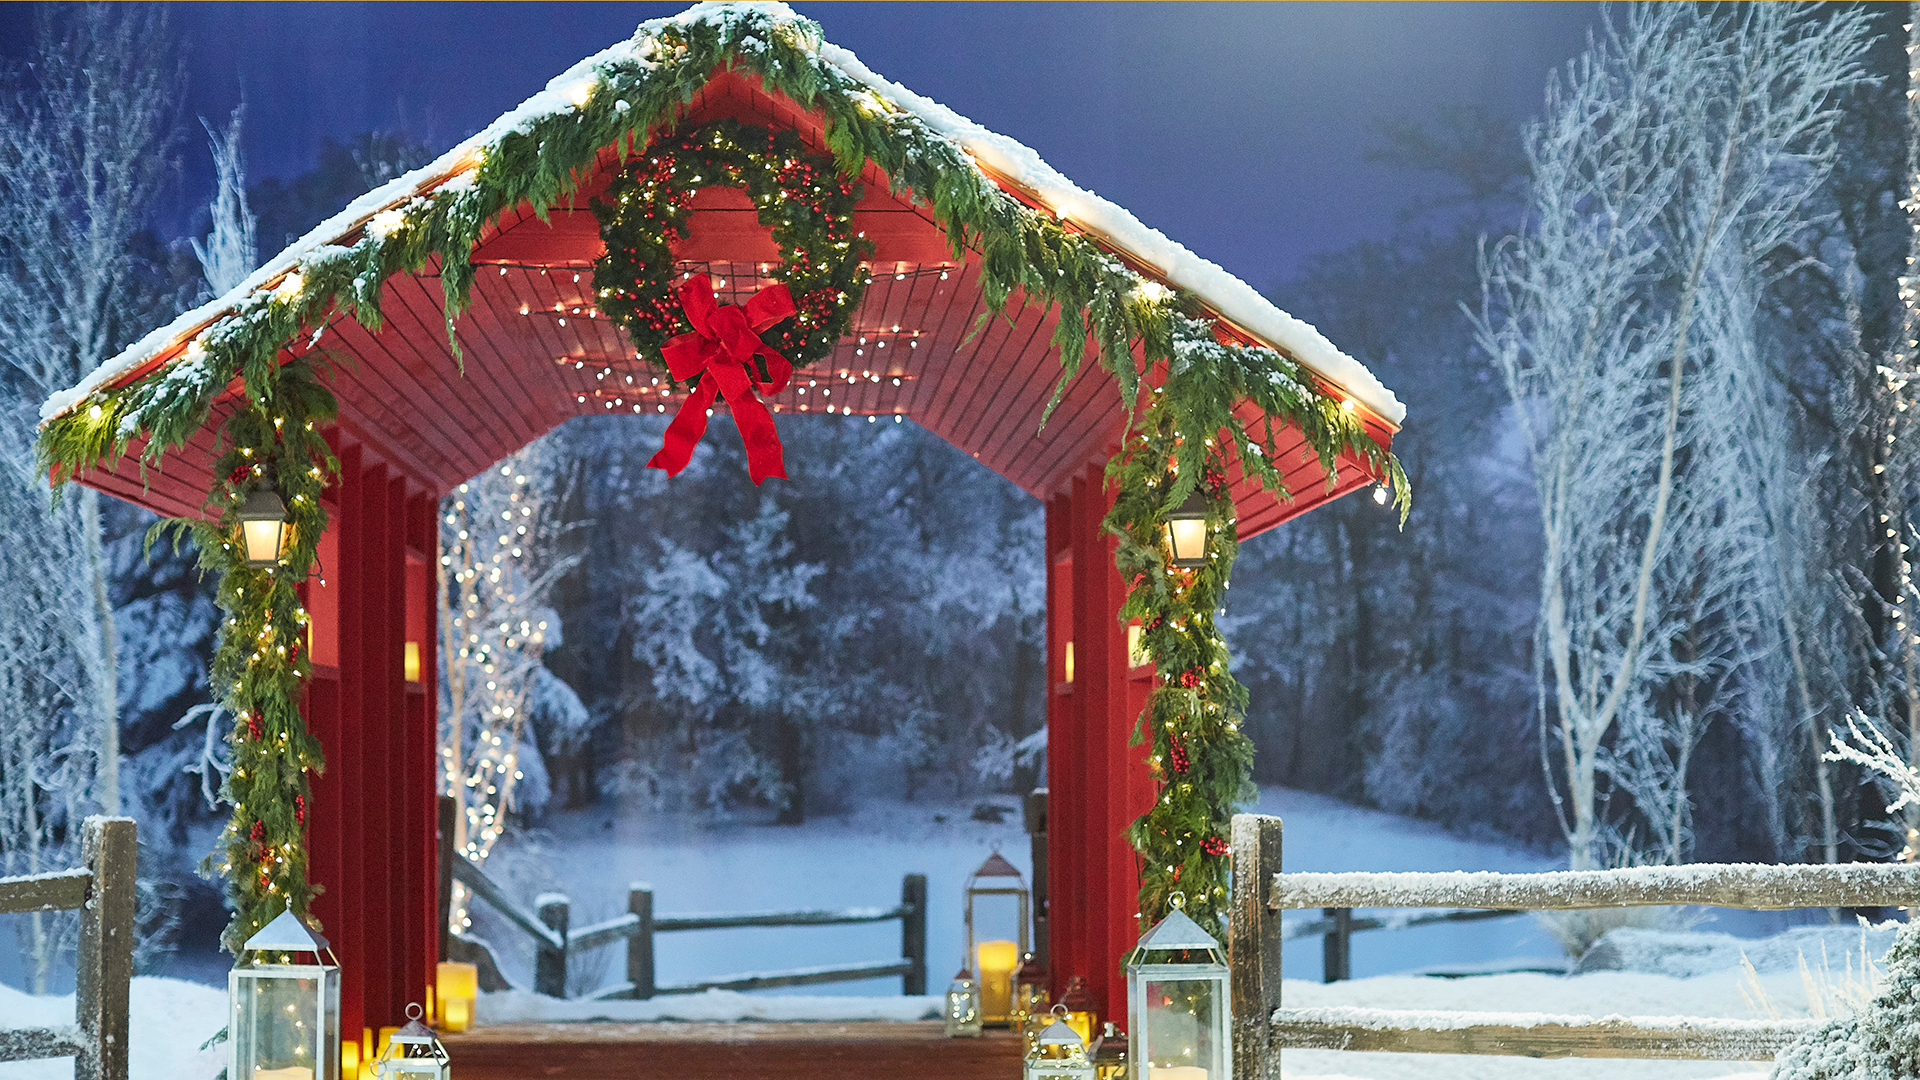 Covered Bridge Zoom Background Christmas Zoom Background That Even Santa Claus Himself Would Approve Of